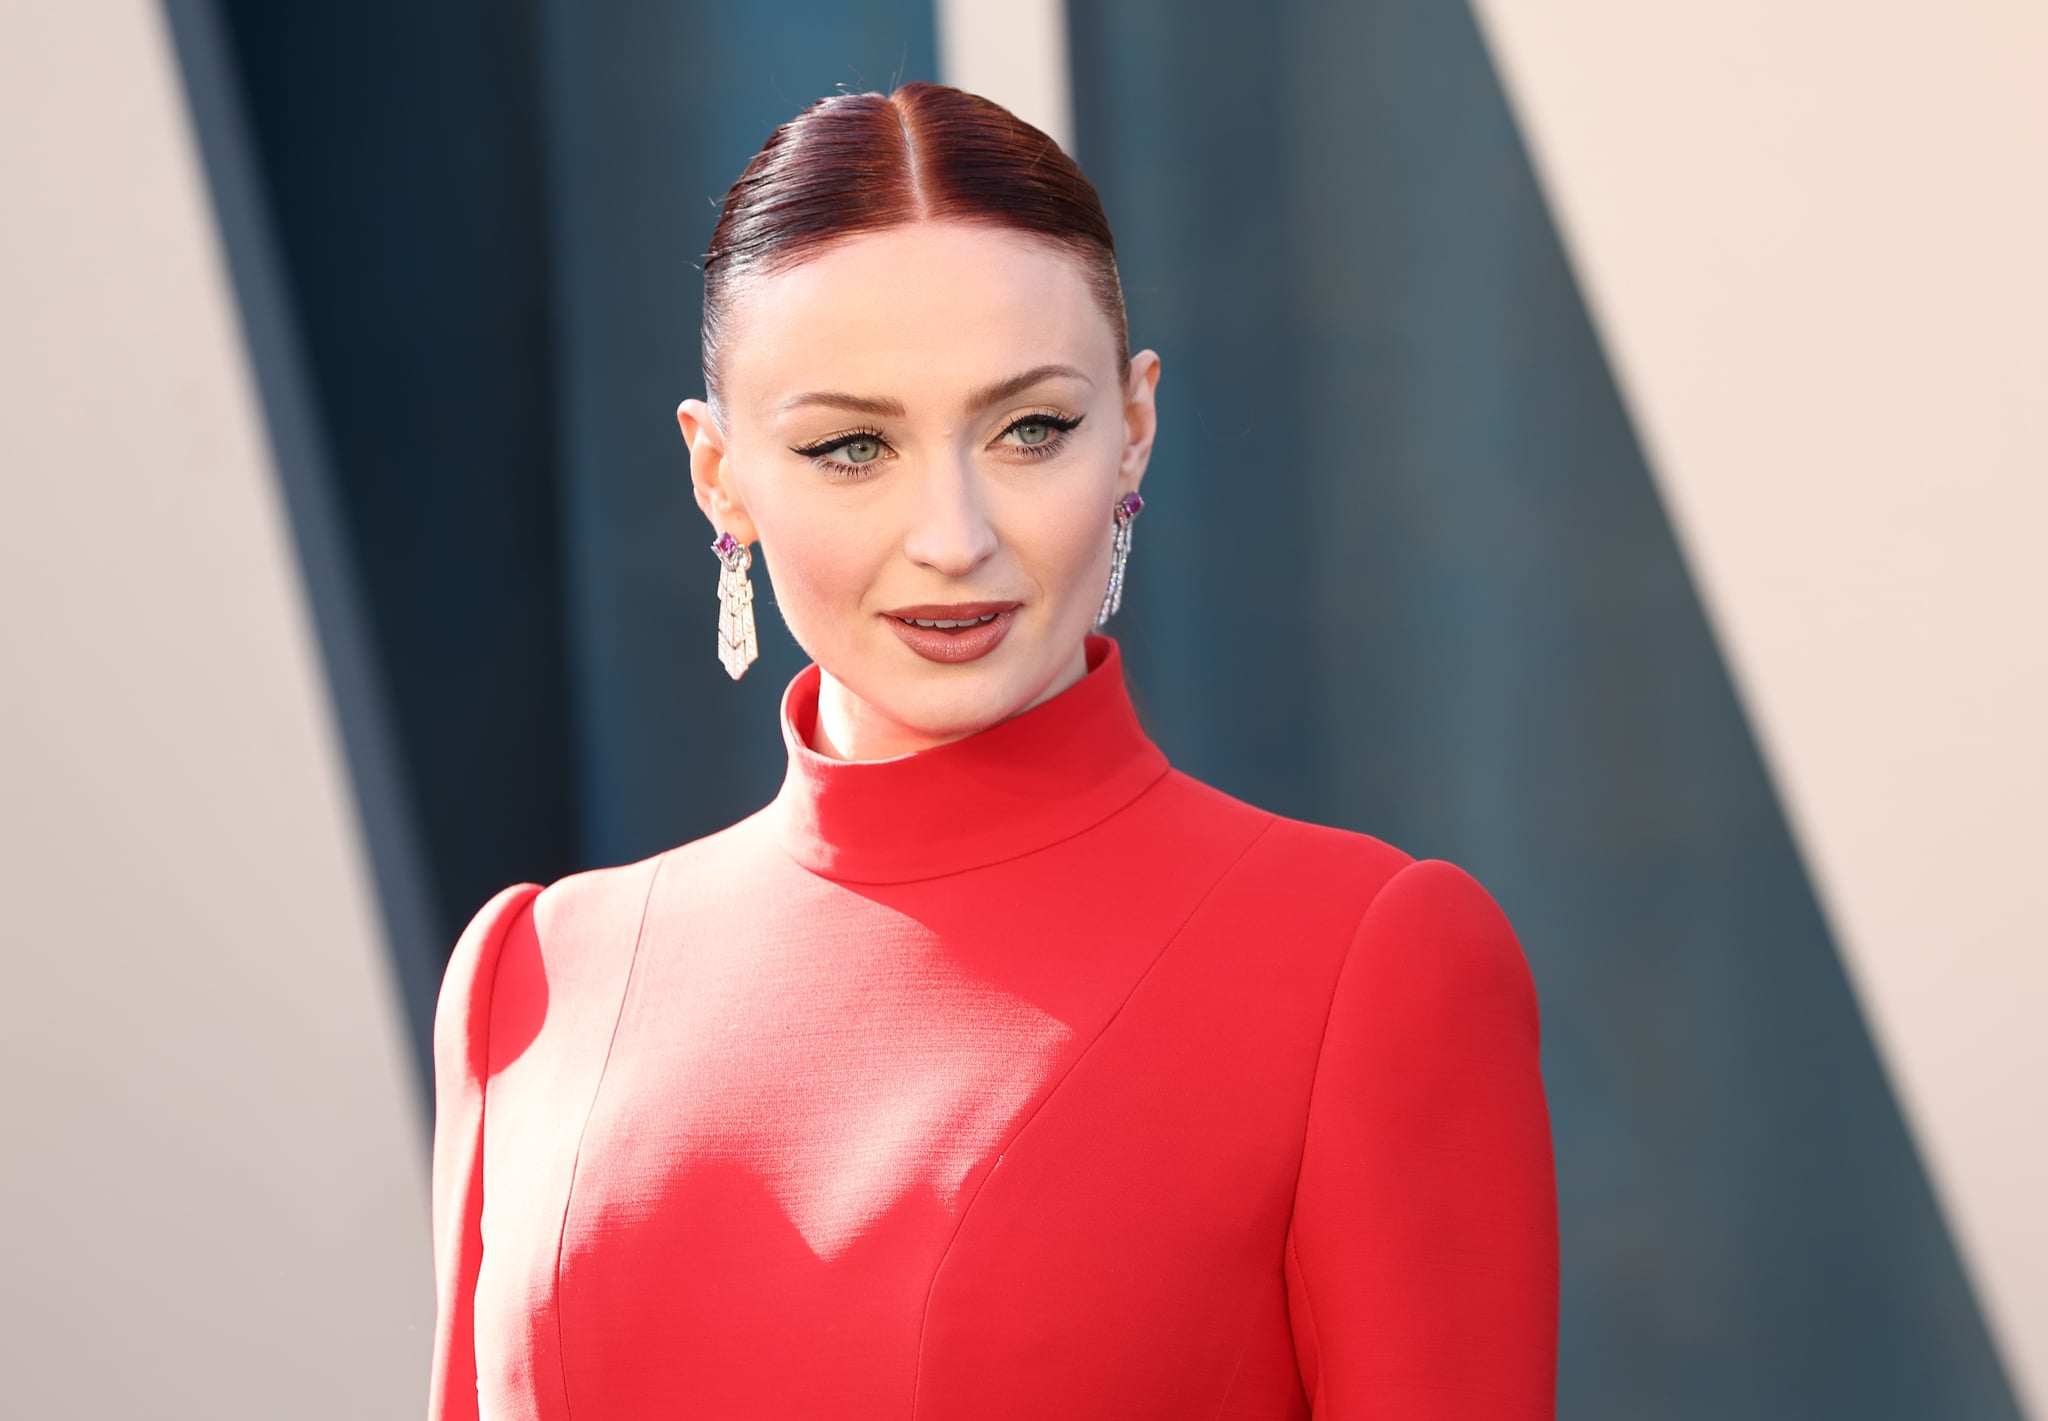 BEVERLY HILLS, CALIFORNIA - MARCH 27: Sophie Turner attends the 2022 Vanity Fair Oscar Party hosted by Radhika Jones at Wallis Annenberg Centre for the Performing Arts on March 27, 2022 in Beverly Hills, California. (Photo by Arturo Holmes/FilmMagic)